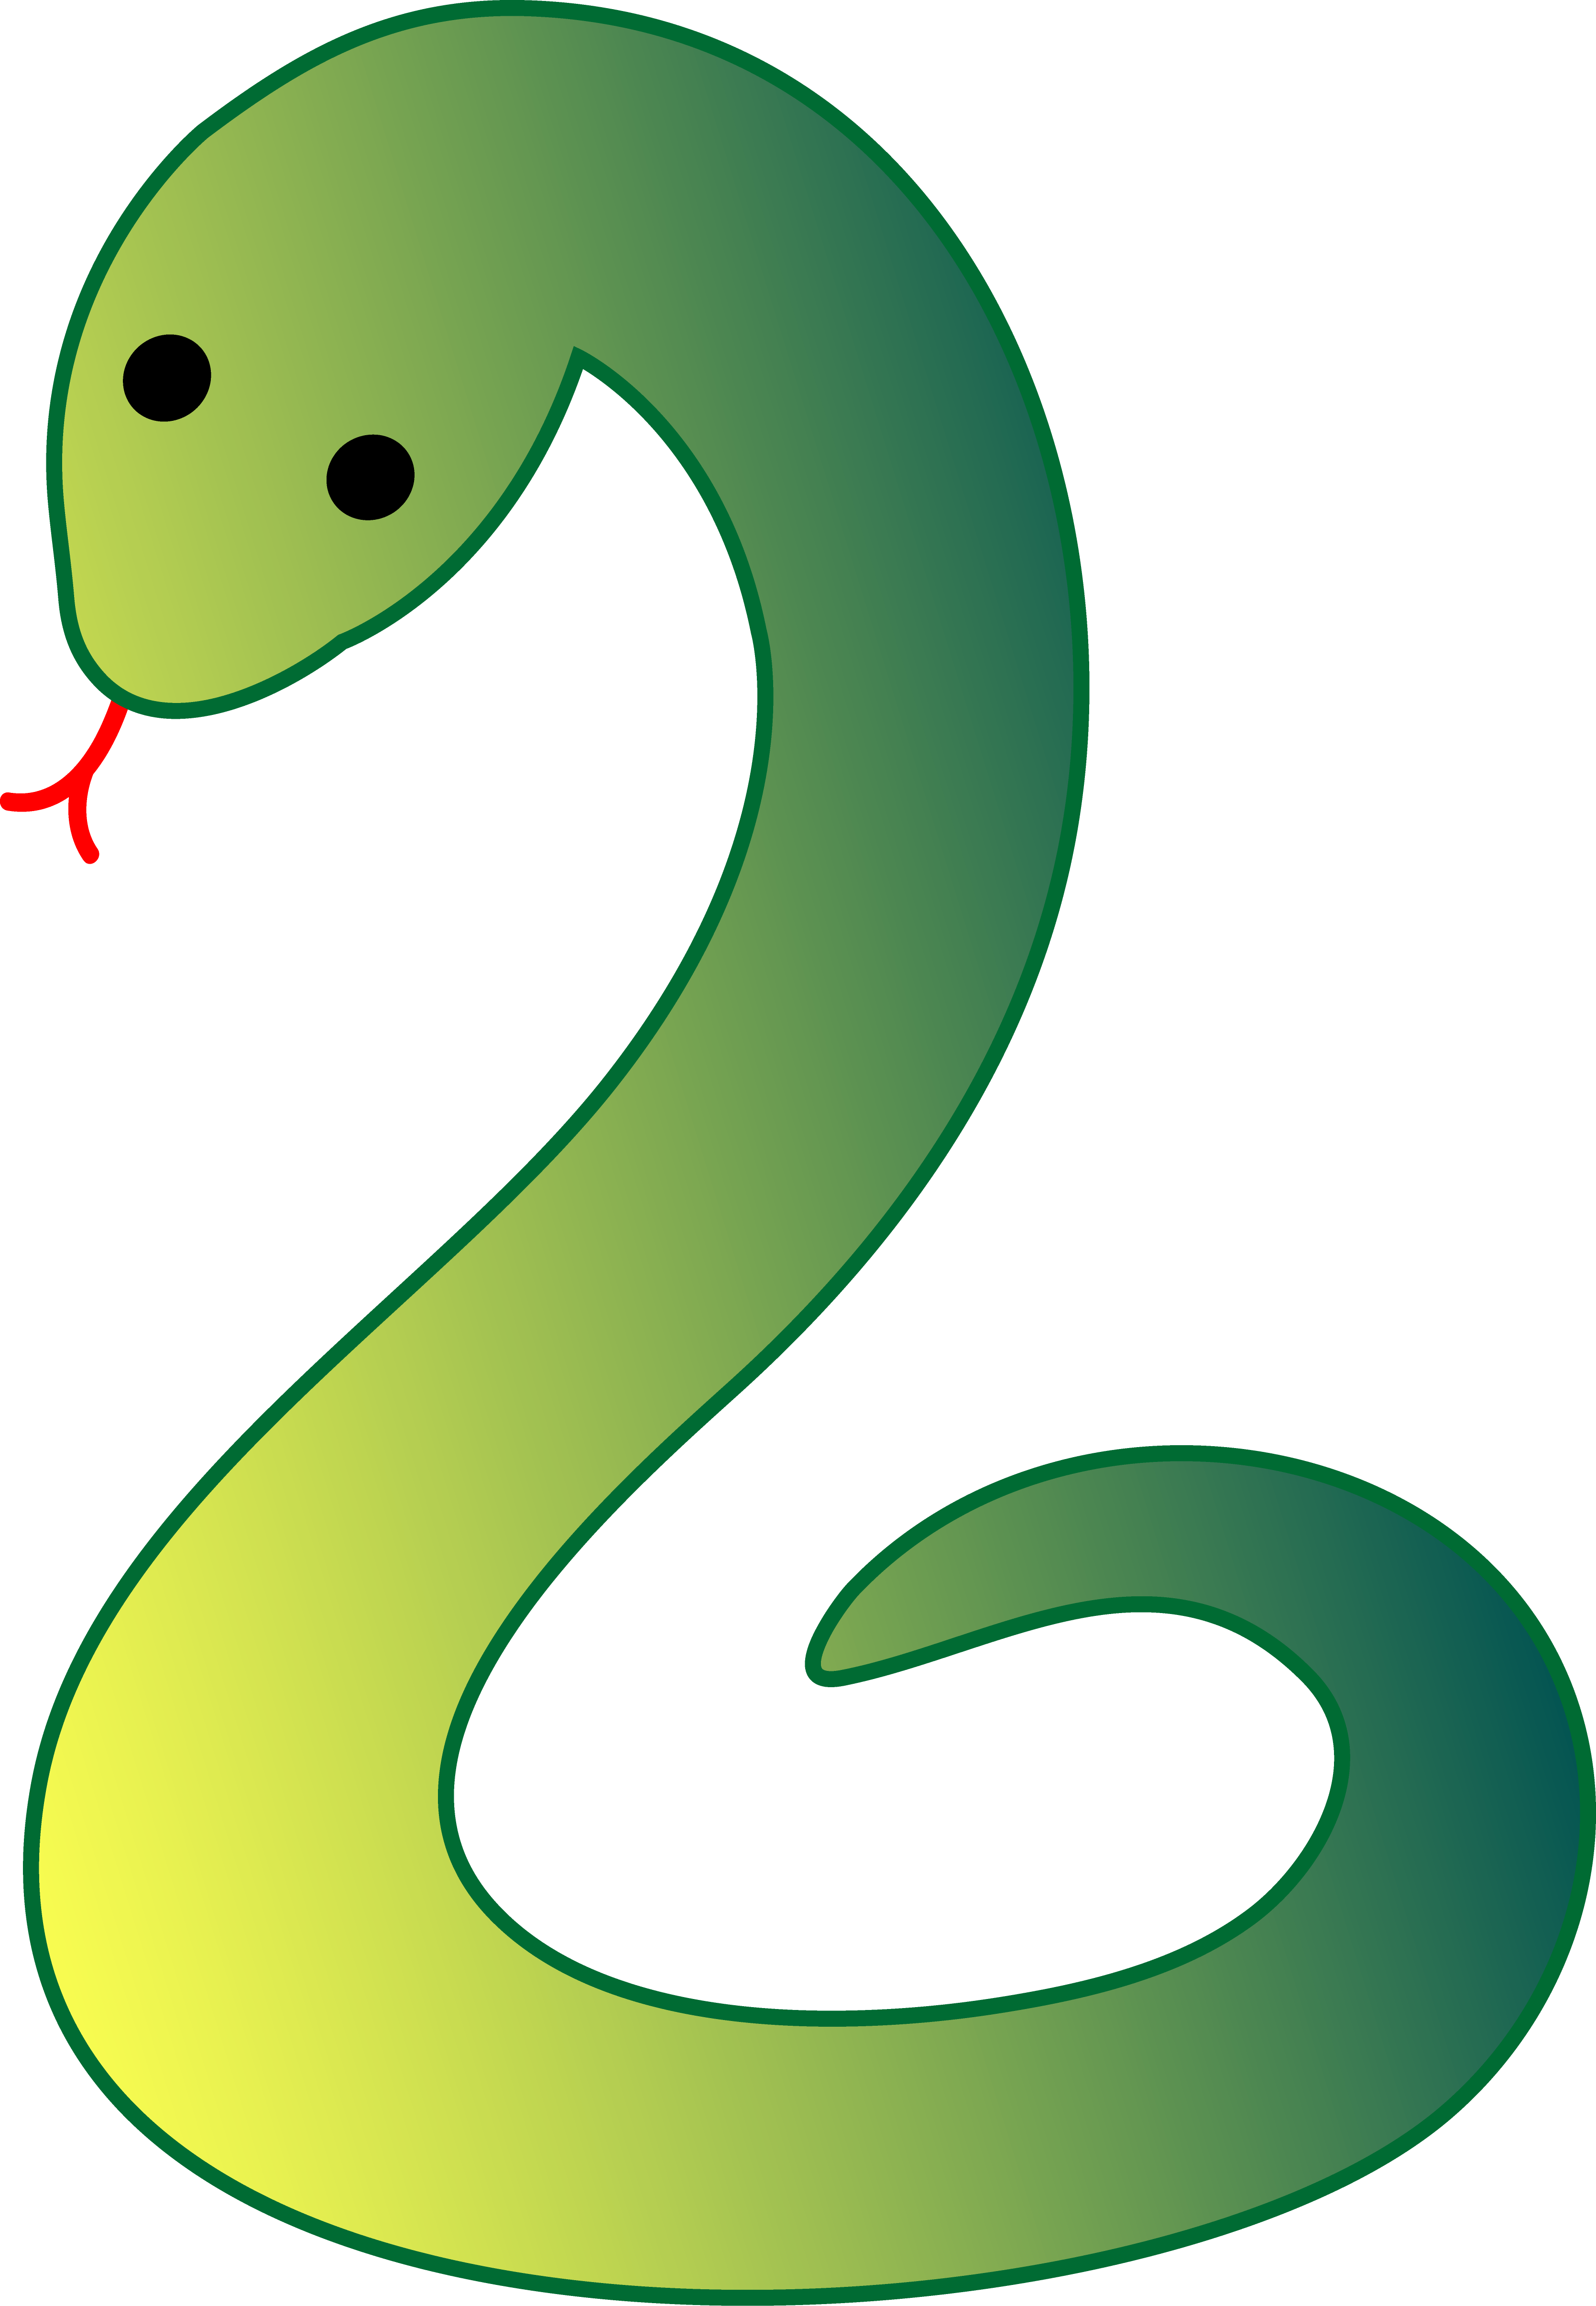 Worm clipart cute snake. Black and white panda